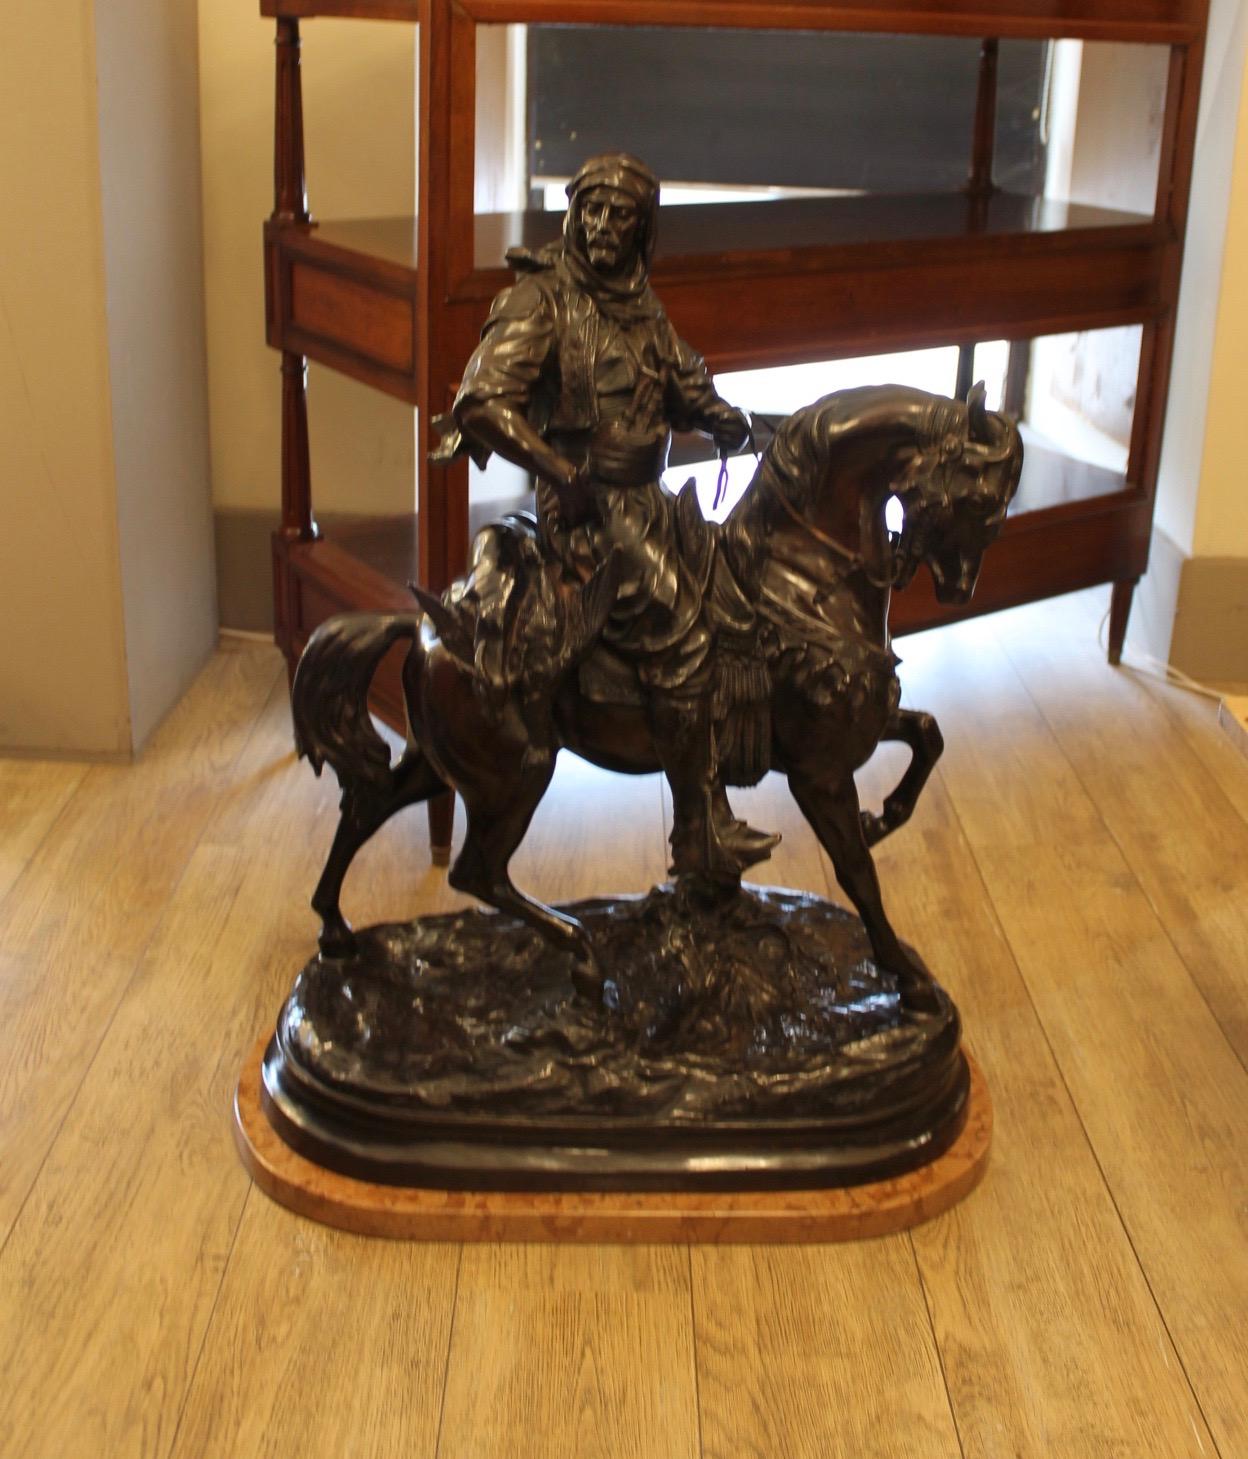 Important Bronze Moorish Rider, Return from the Hunt, Signed Barge Fils
French work, end of the 19th century (1M)

Rider returning from the hunt with game hanging in his saddle
Signed on the base Barge fils
Work listed